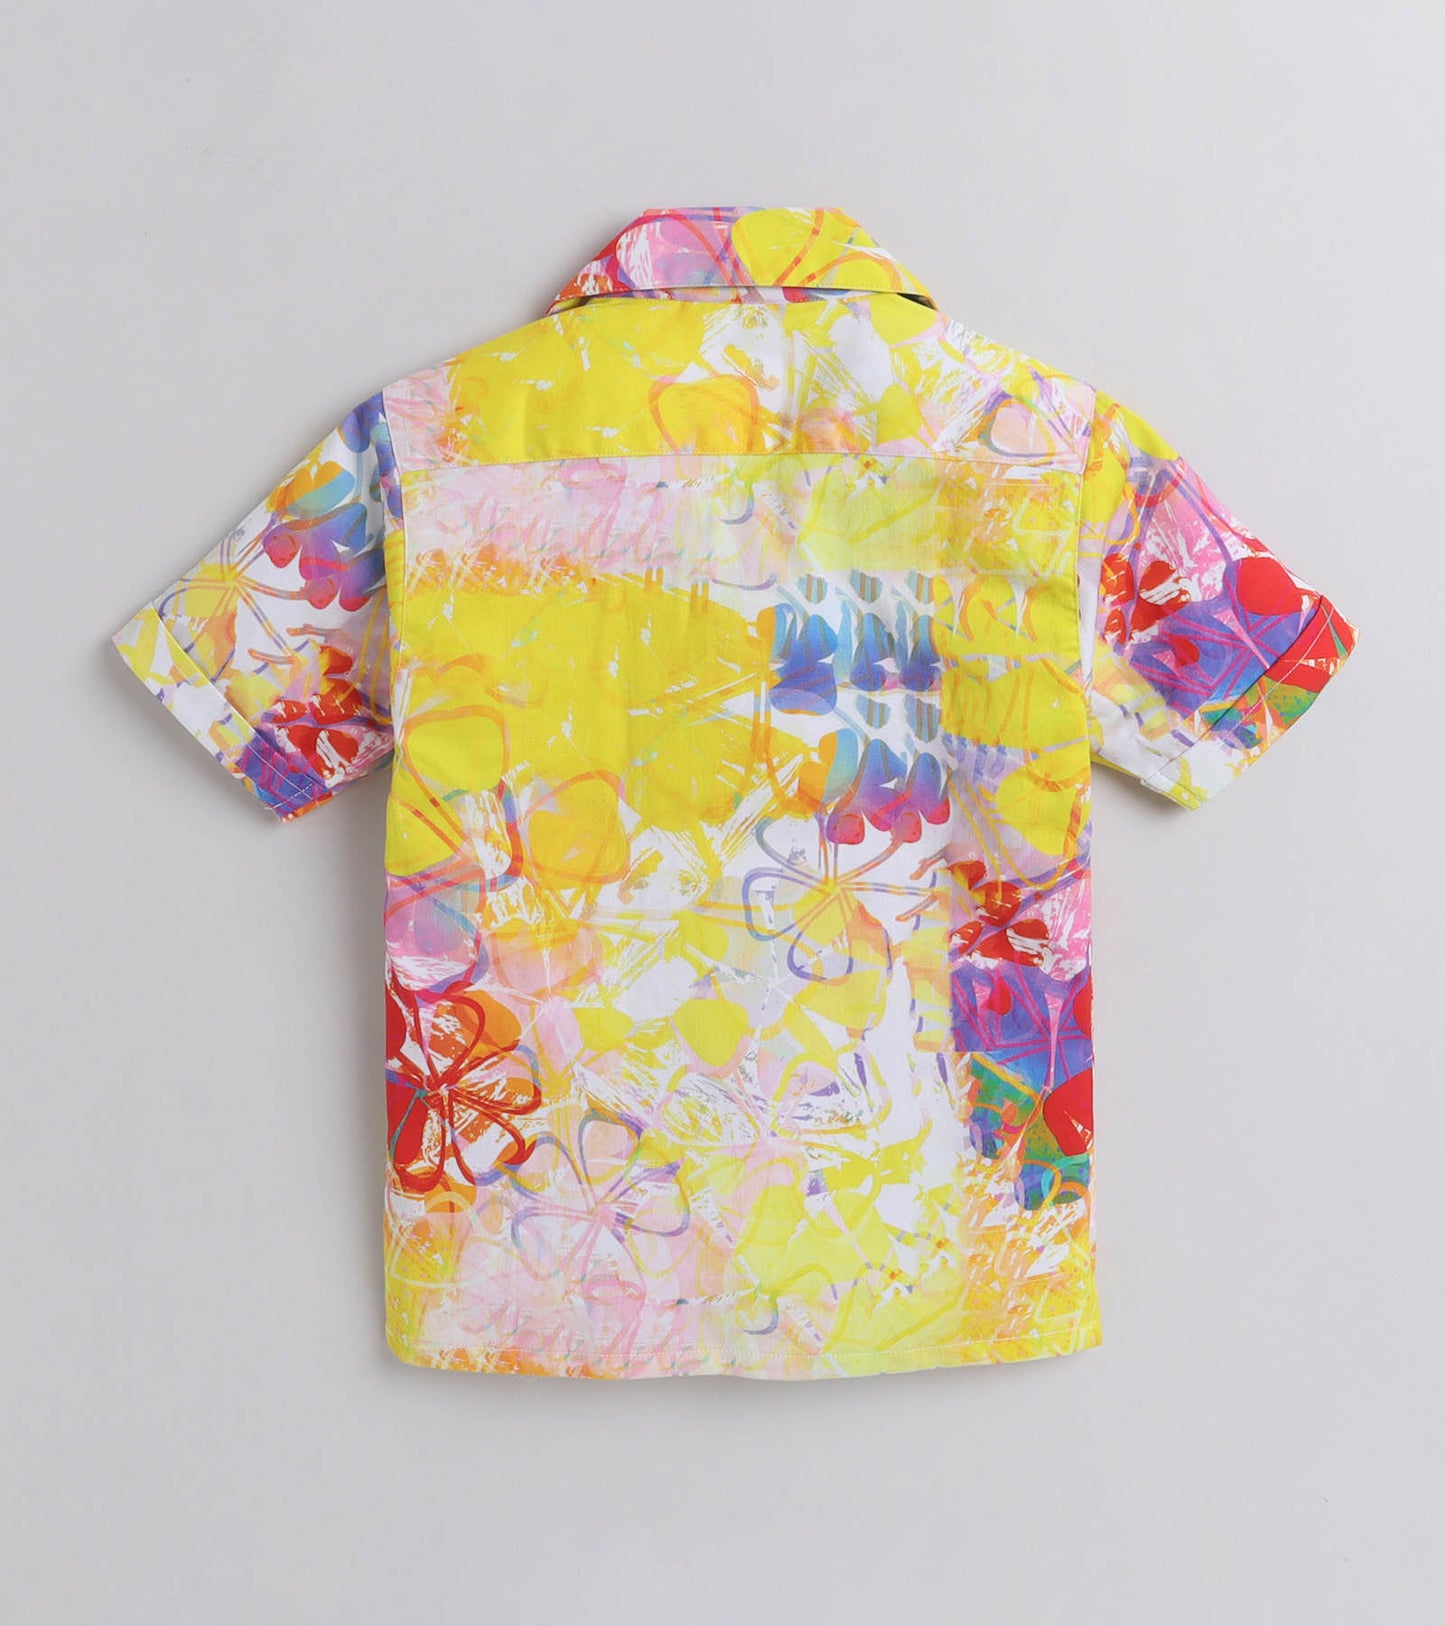 Stencil floral Digital printed Shirt with White solid Shorts